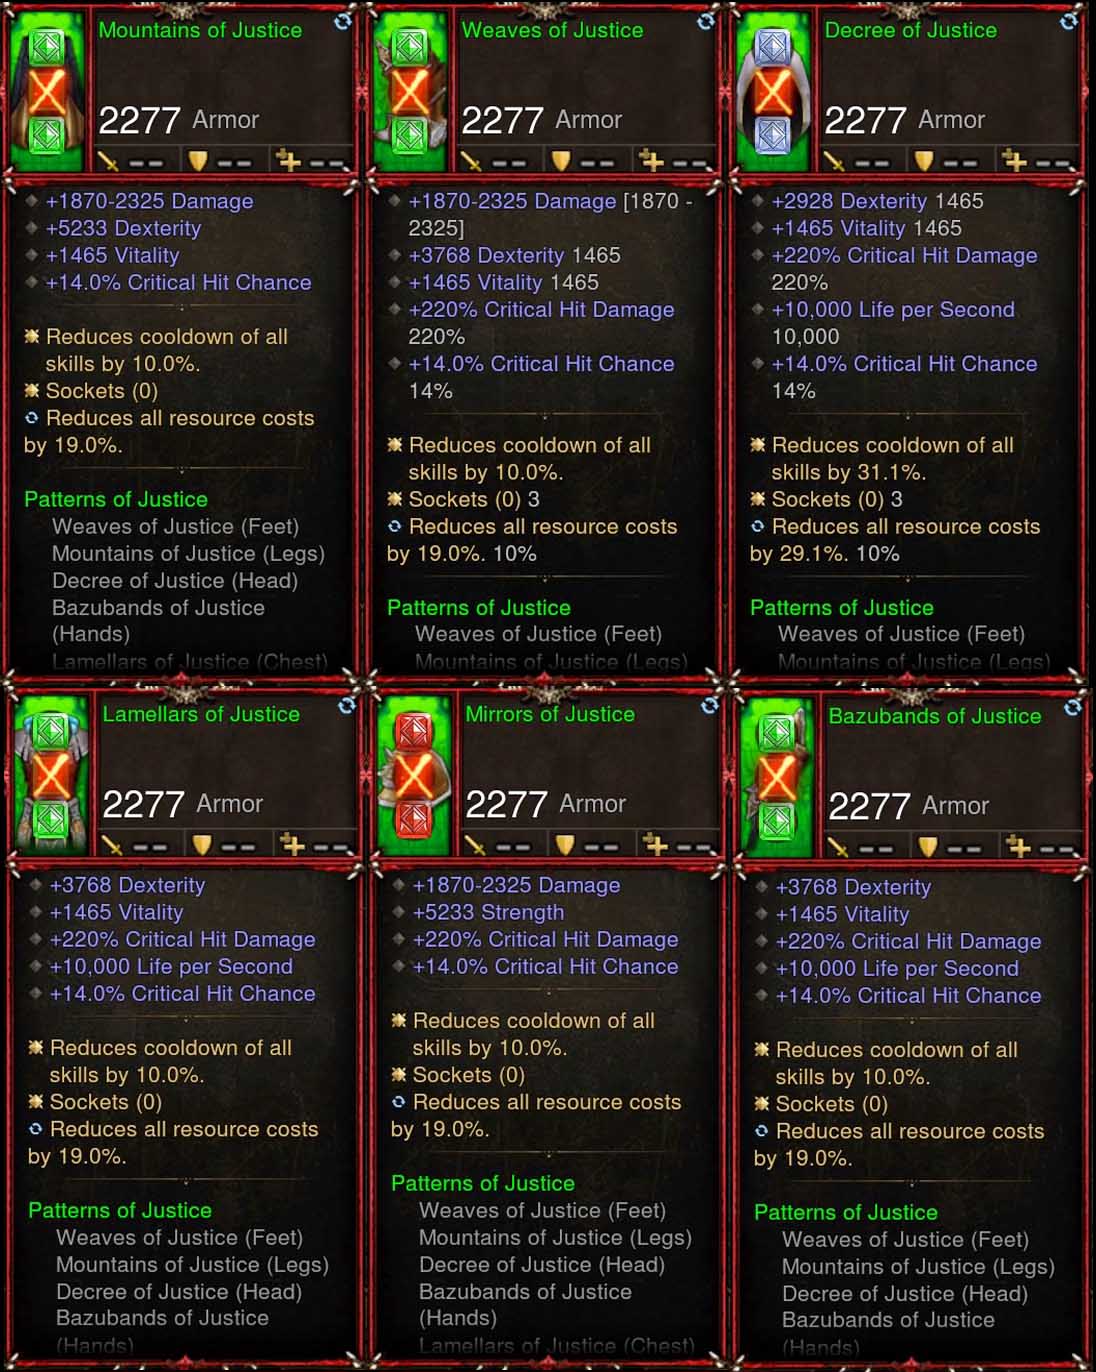 [Primal Ancient] 6x Piece Patch 2.6.7 Justice Monk Set Diablo 3 Mods ROS Seasonal and Non Seasonal Save Mod - Modded Items and Gear - Hacks - Cheats - Trainers for Playstation 4 - Playstation 5 - Nintendo Switch - Xbox One